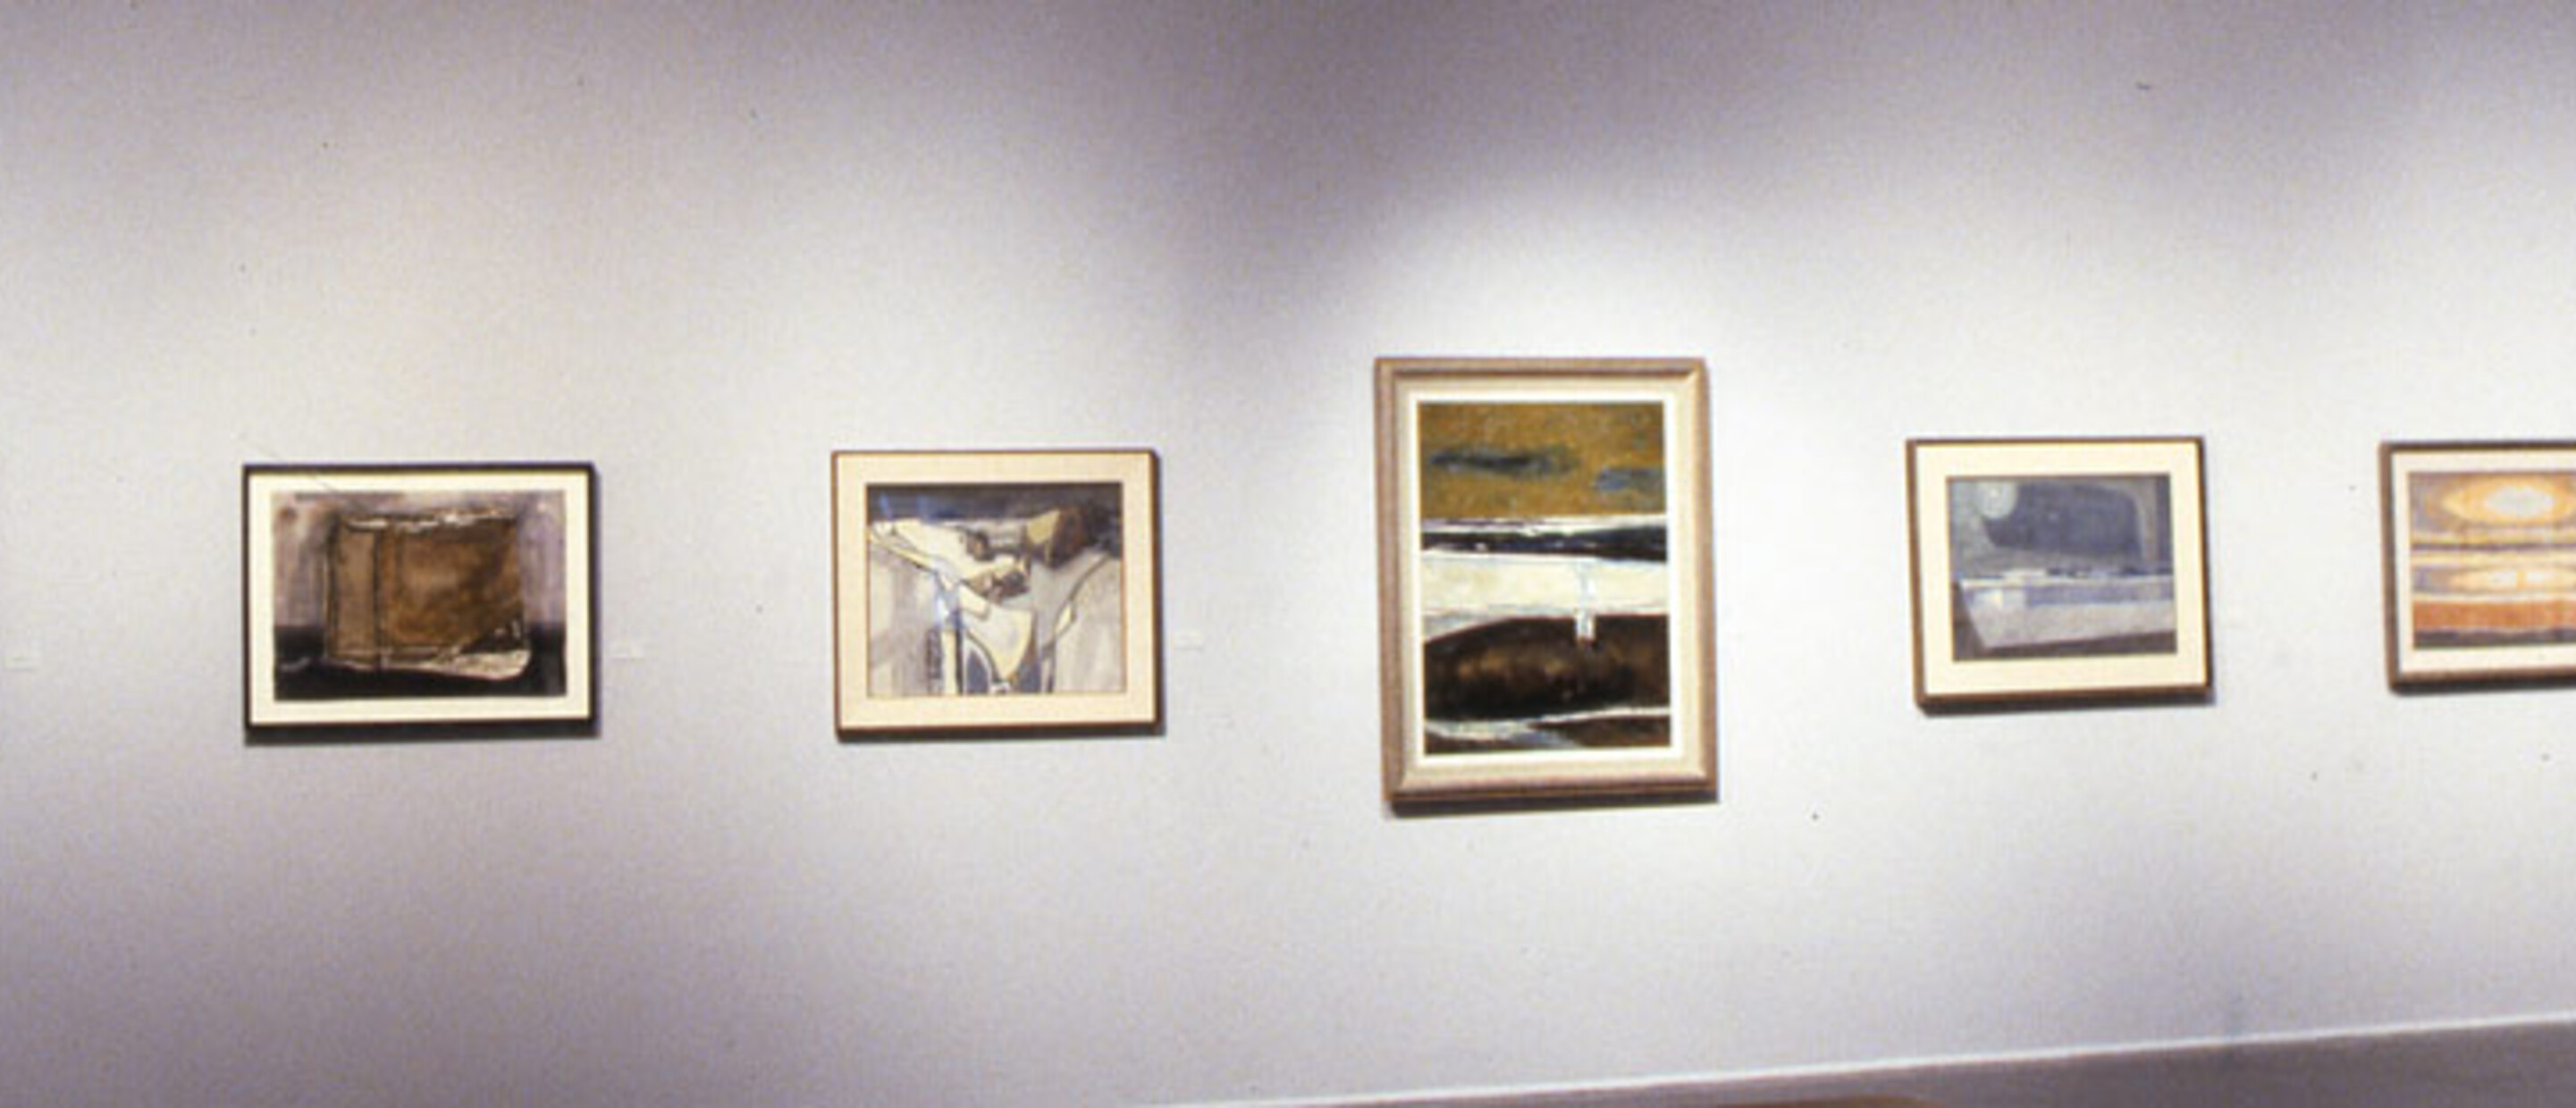 Installation view at Pomona College Museum of Art.